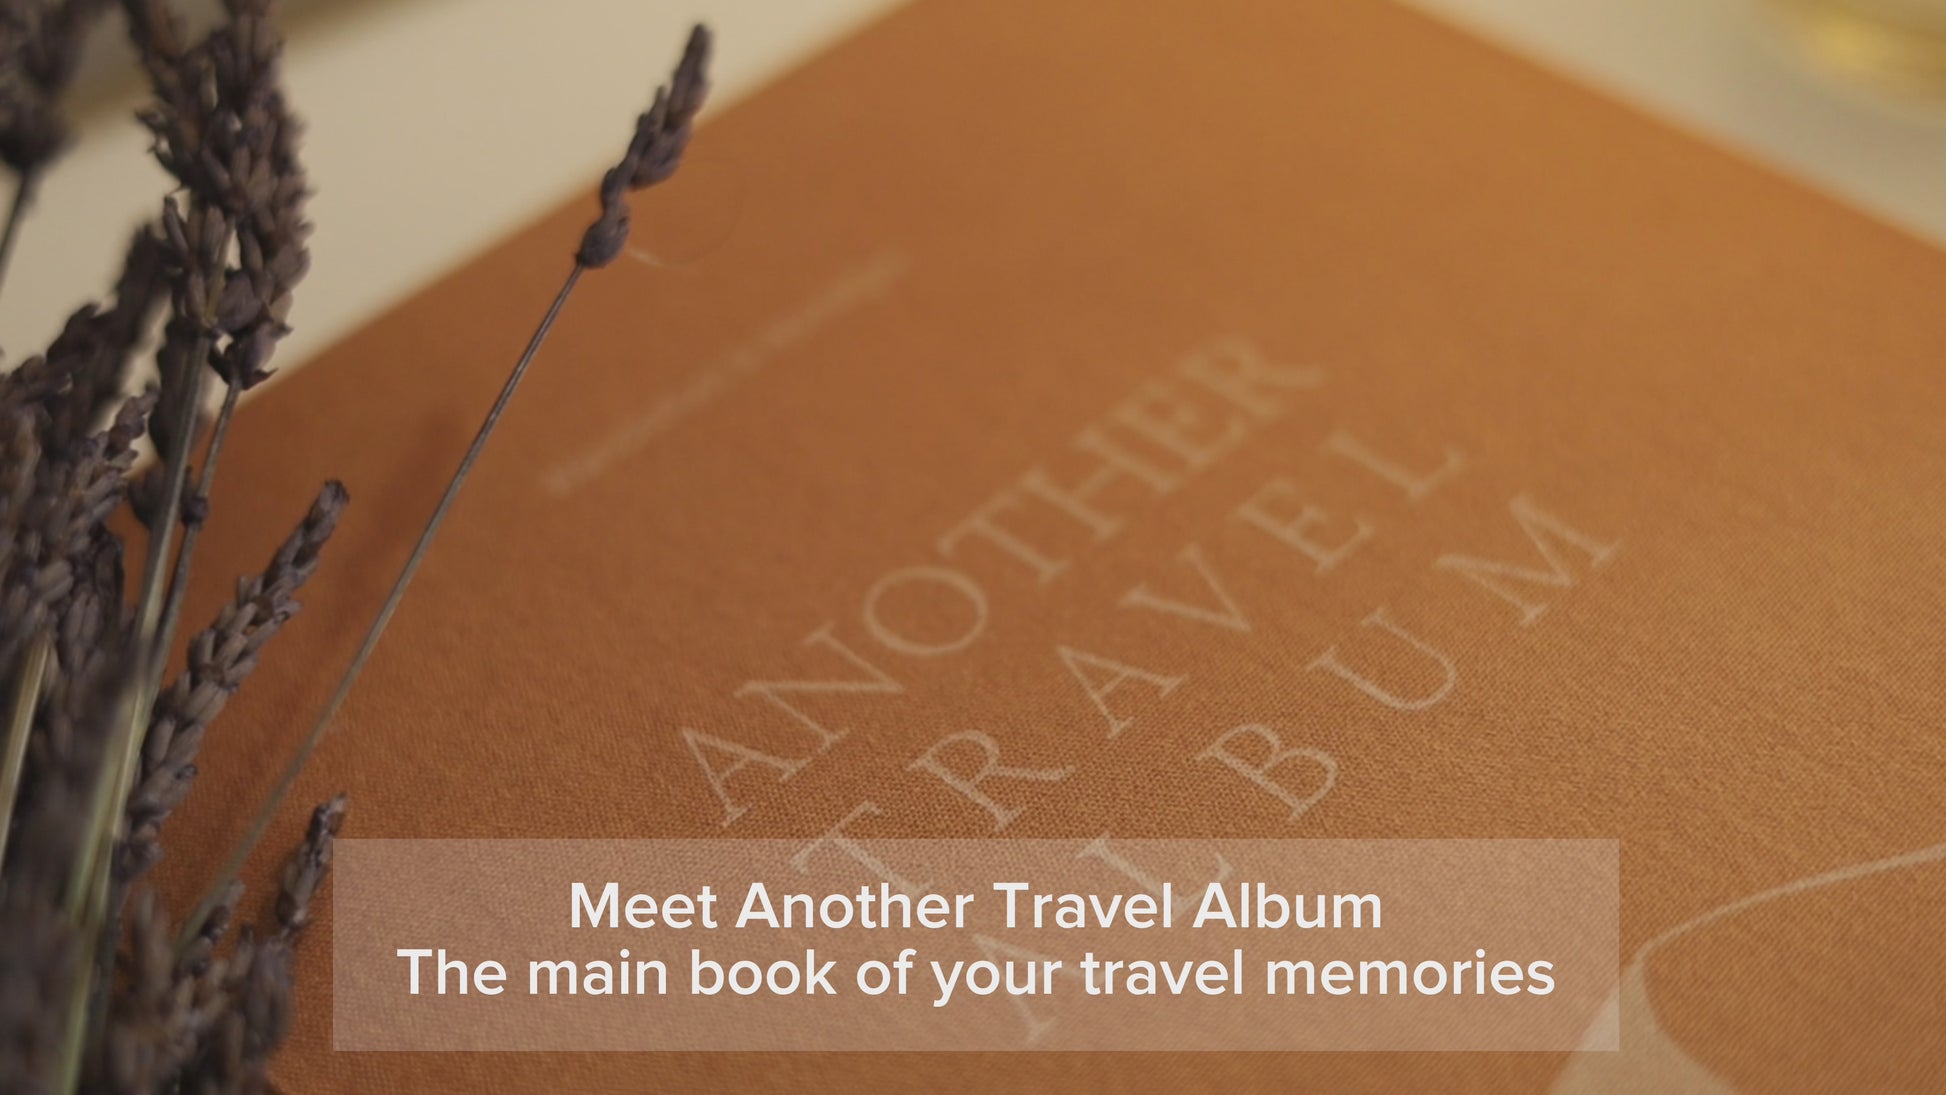 How to Make a Simple Travel Journal and Travel Scrapbook